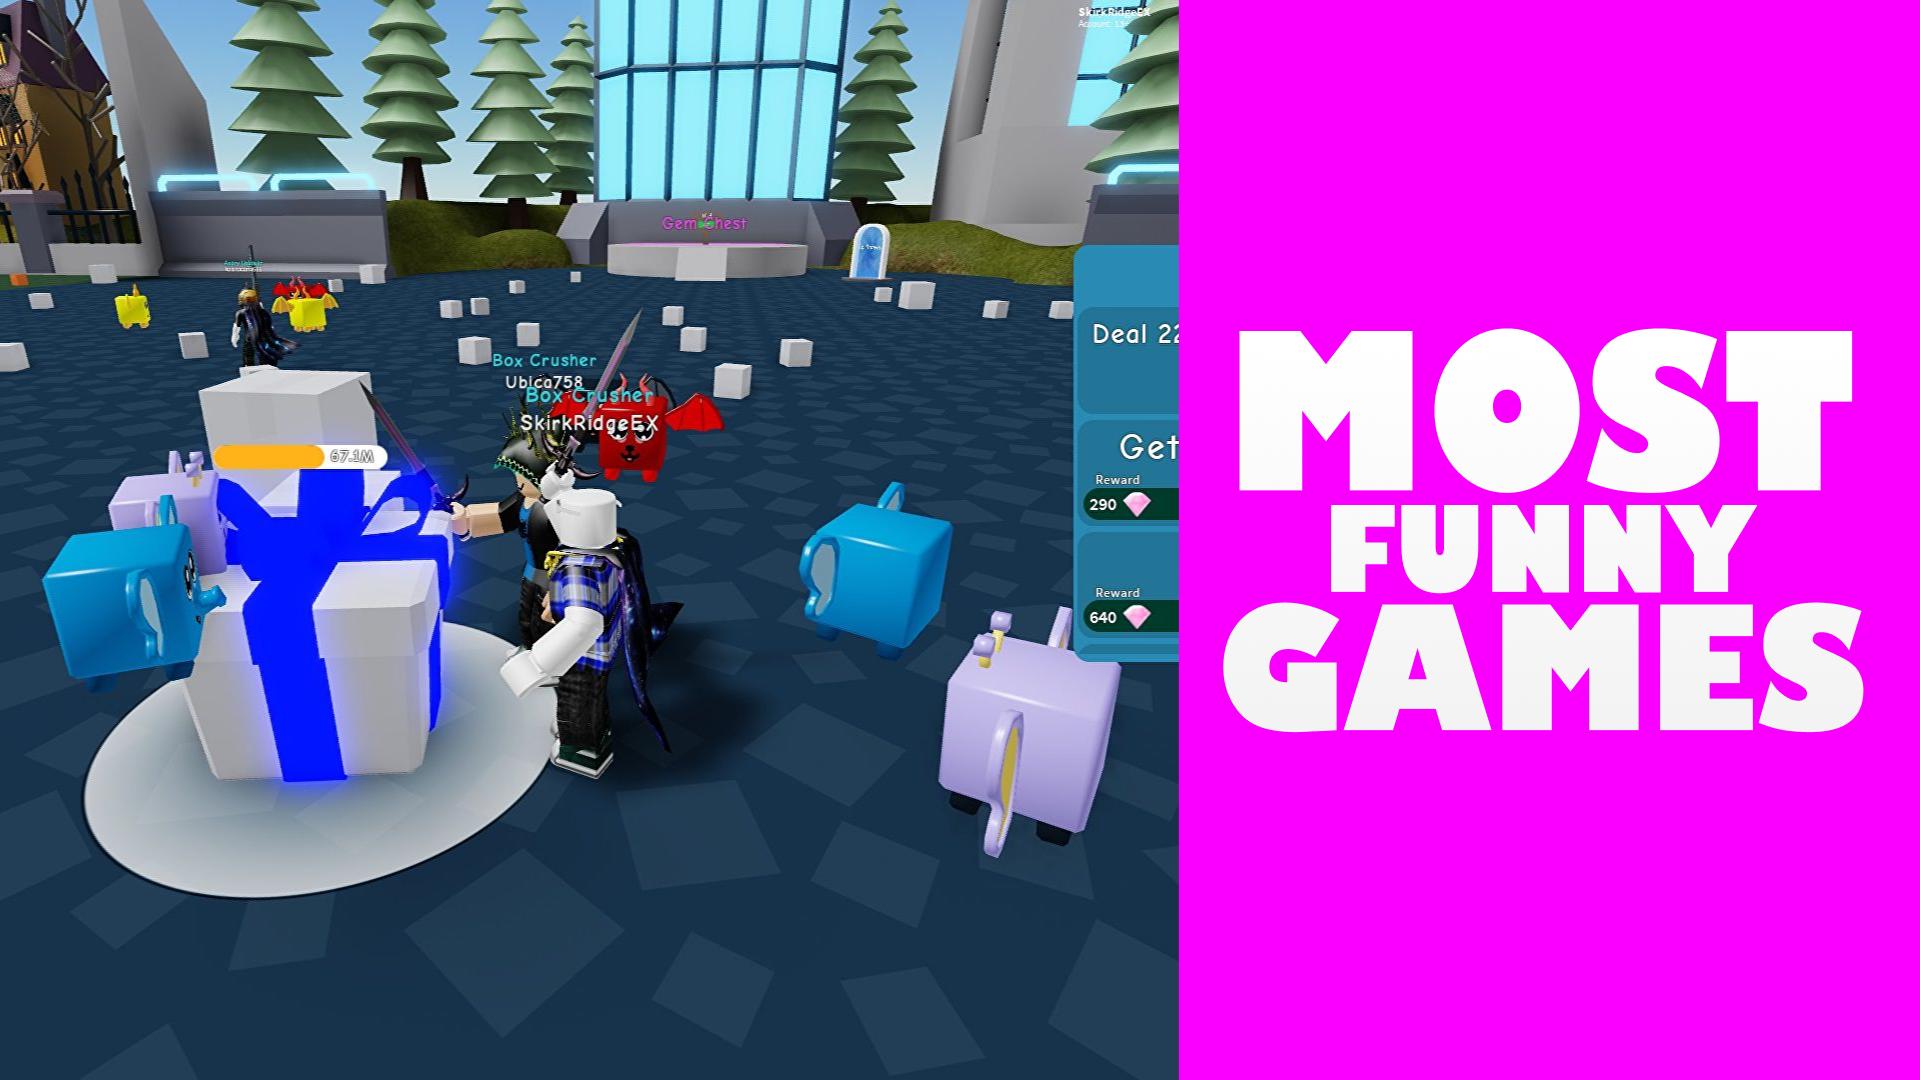 MOD-MASTER for Roblox Game for Android - Download